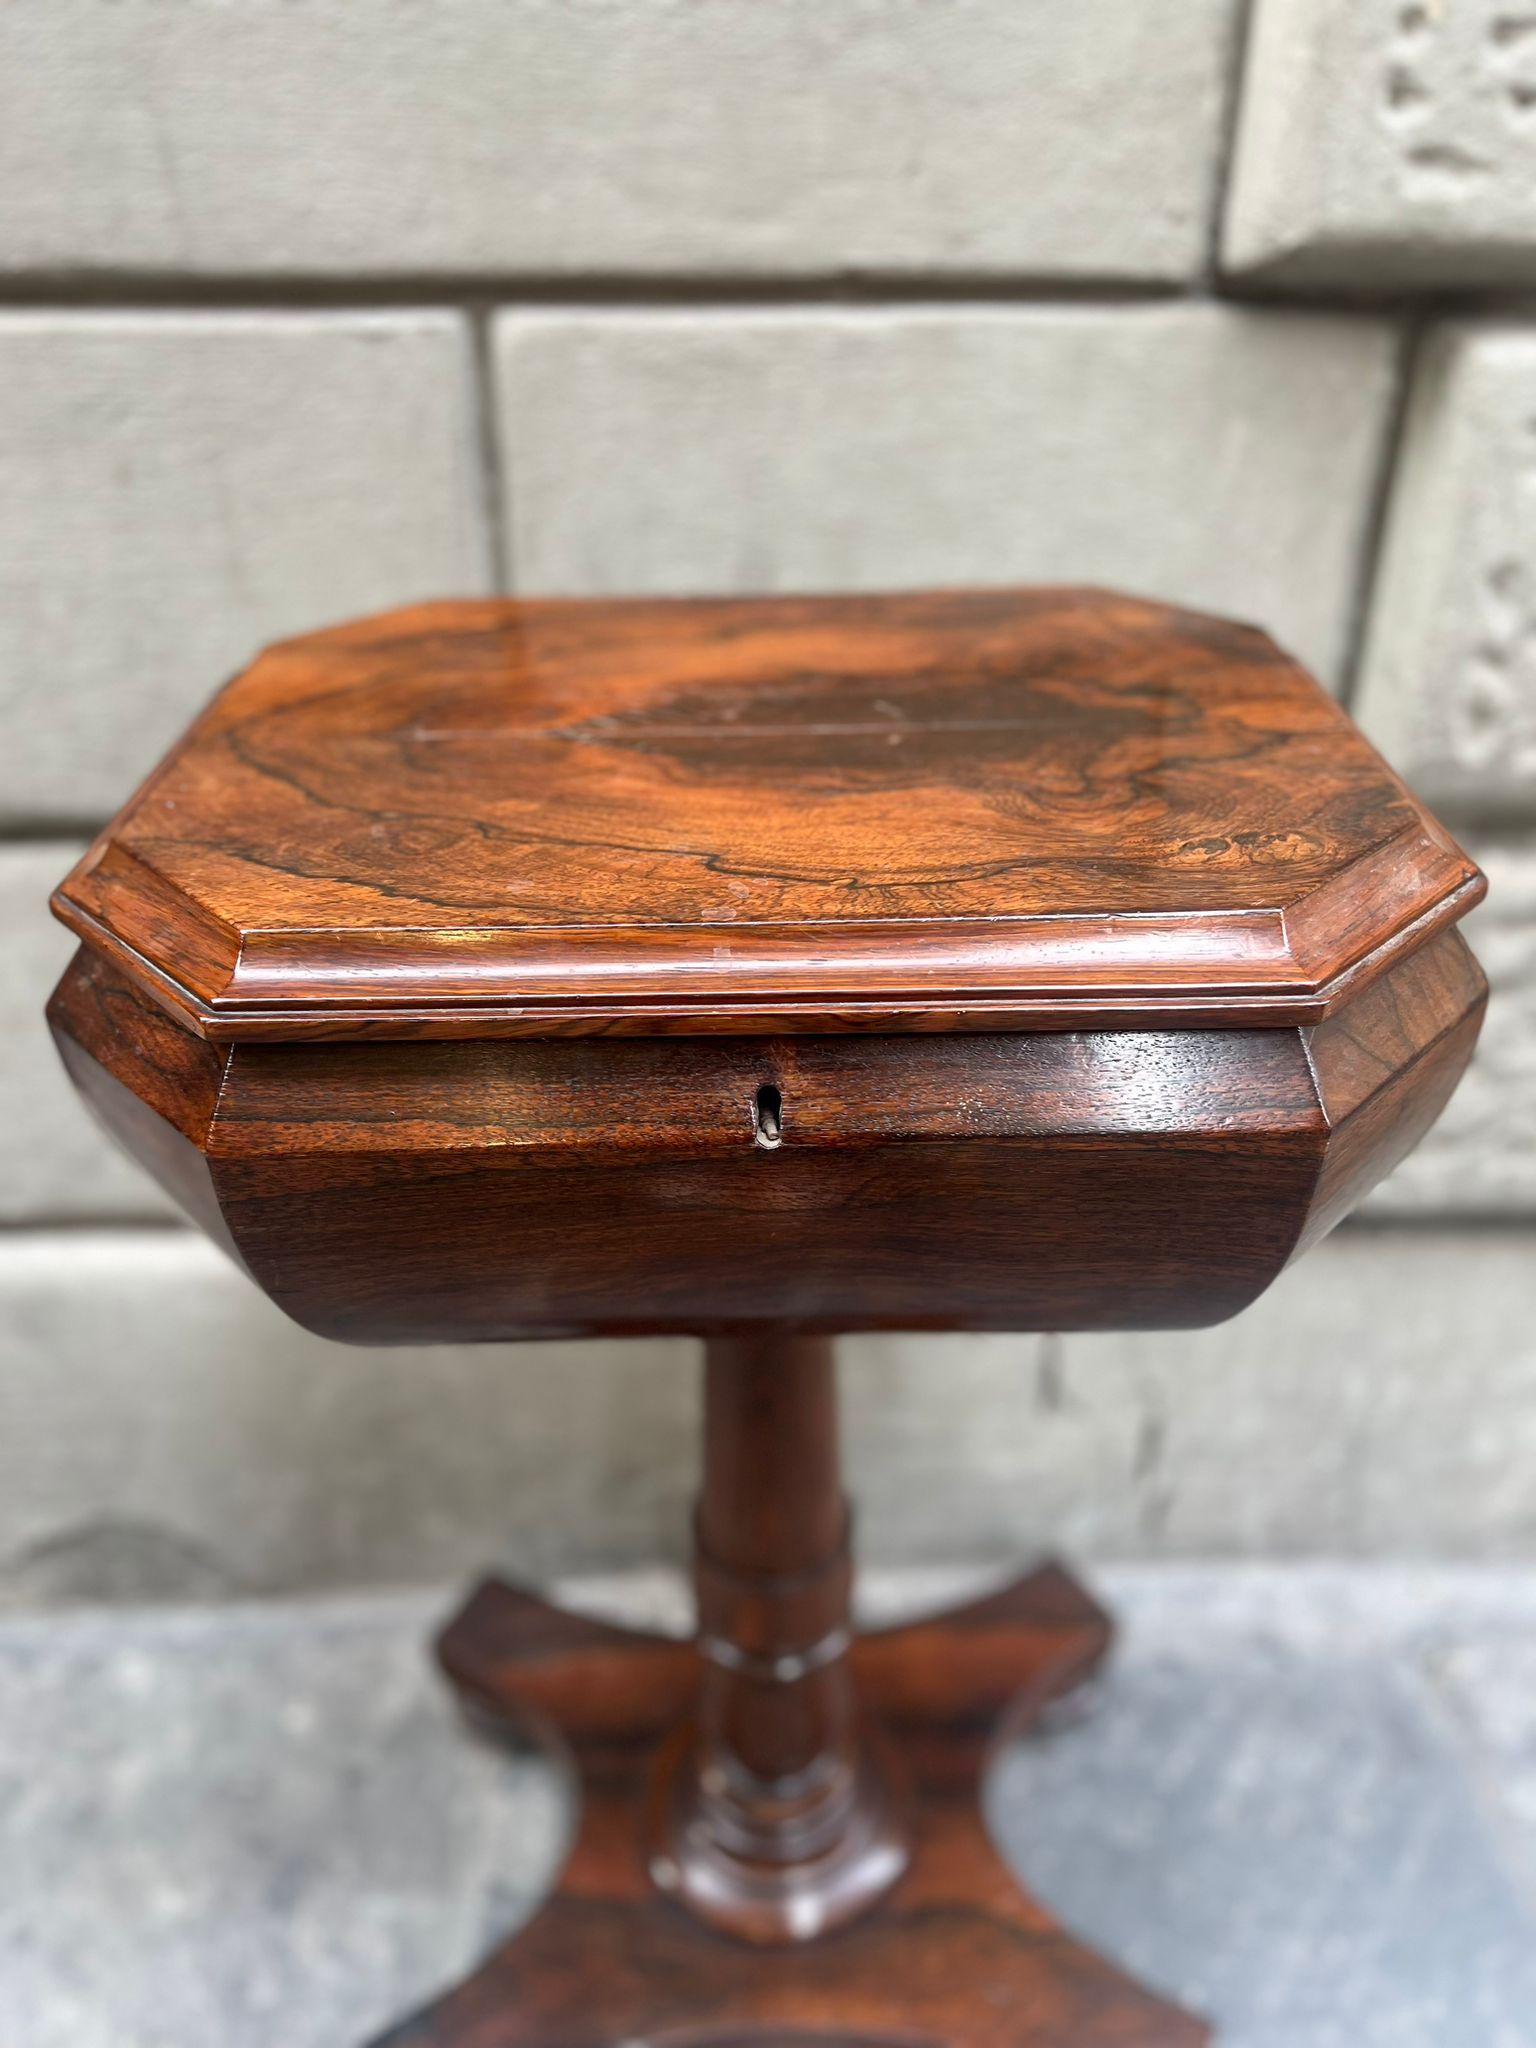 Rosewood tea table, mid-19th century.

Inside, the coffee table has specially designed compartments to hold two teacups and the necessities for making the drink.